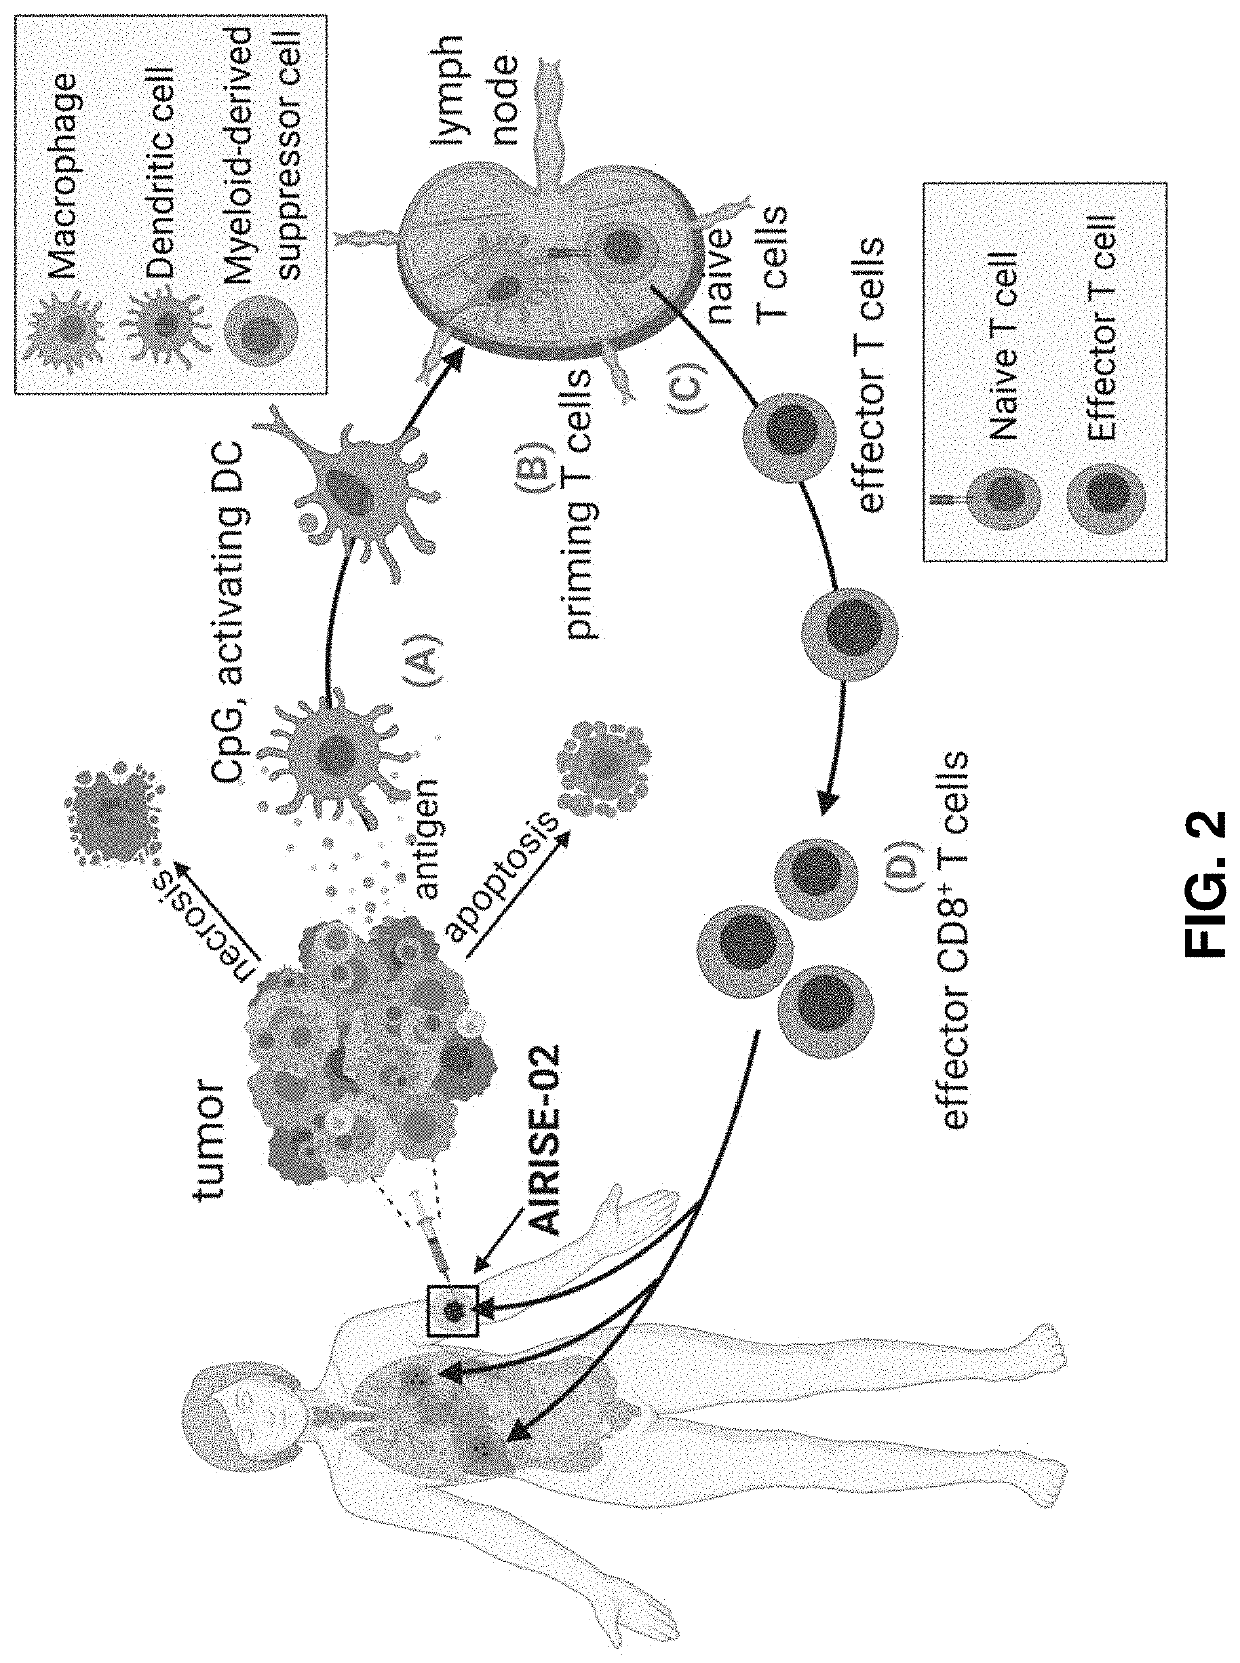 Immunotherapeutic constructs and methods of their use